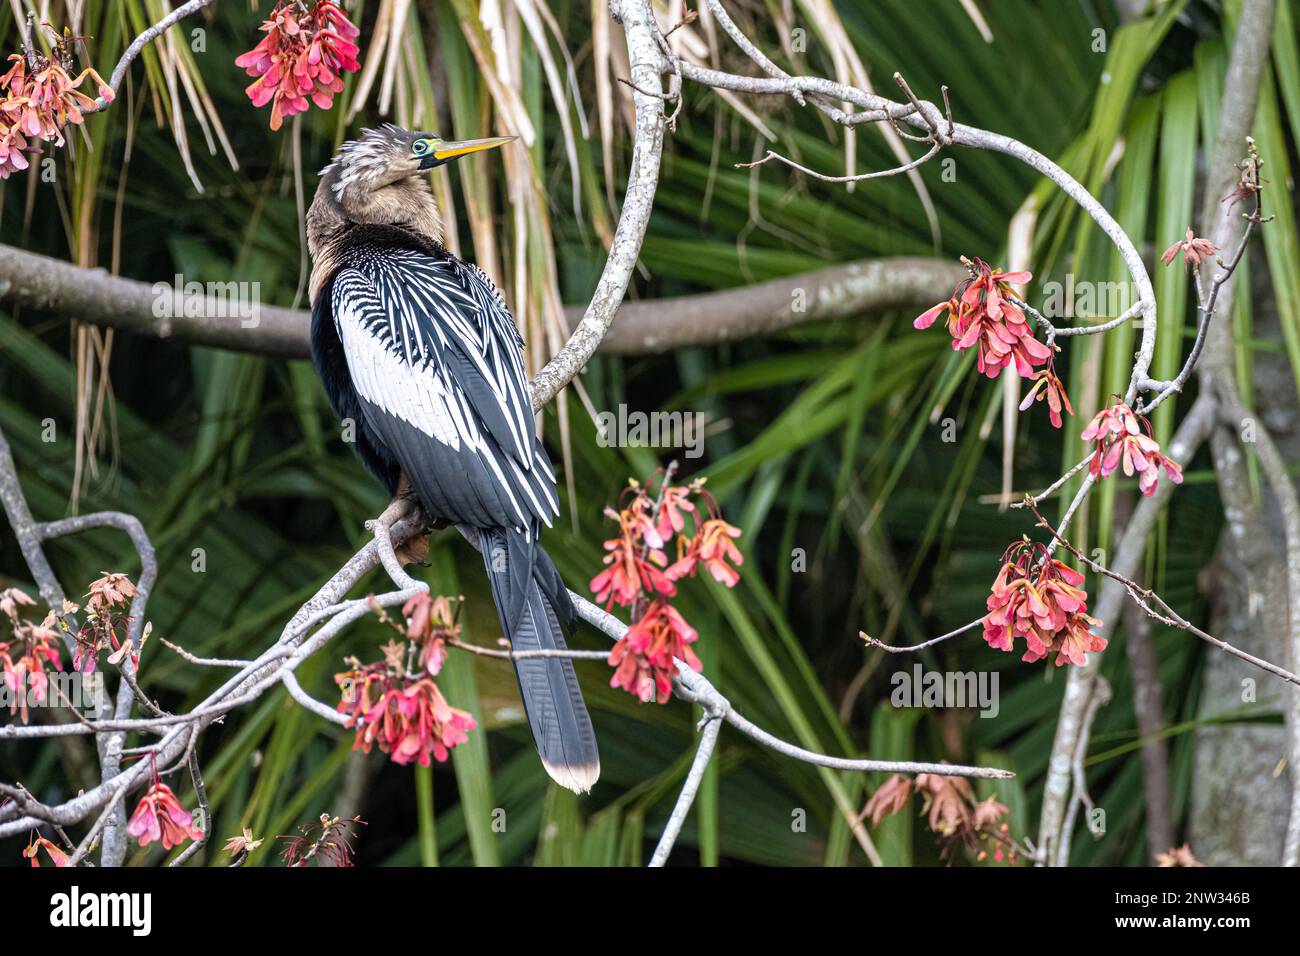 Florida anhinga (also known as a snake bird or American darter) perched amongst pink blossoms at Bird Island Park in Ponte Vedra Beach, Florida. (USA) Stock Photo